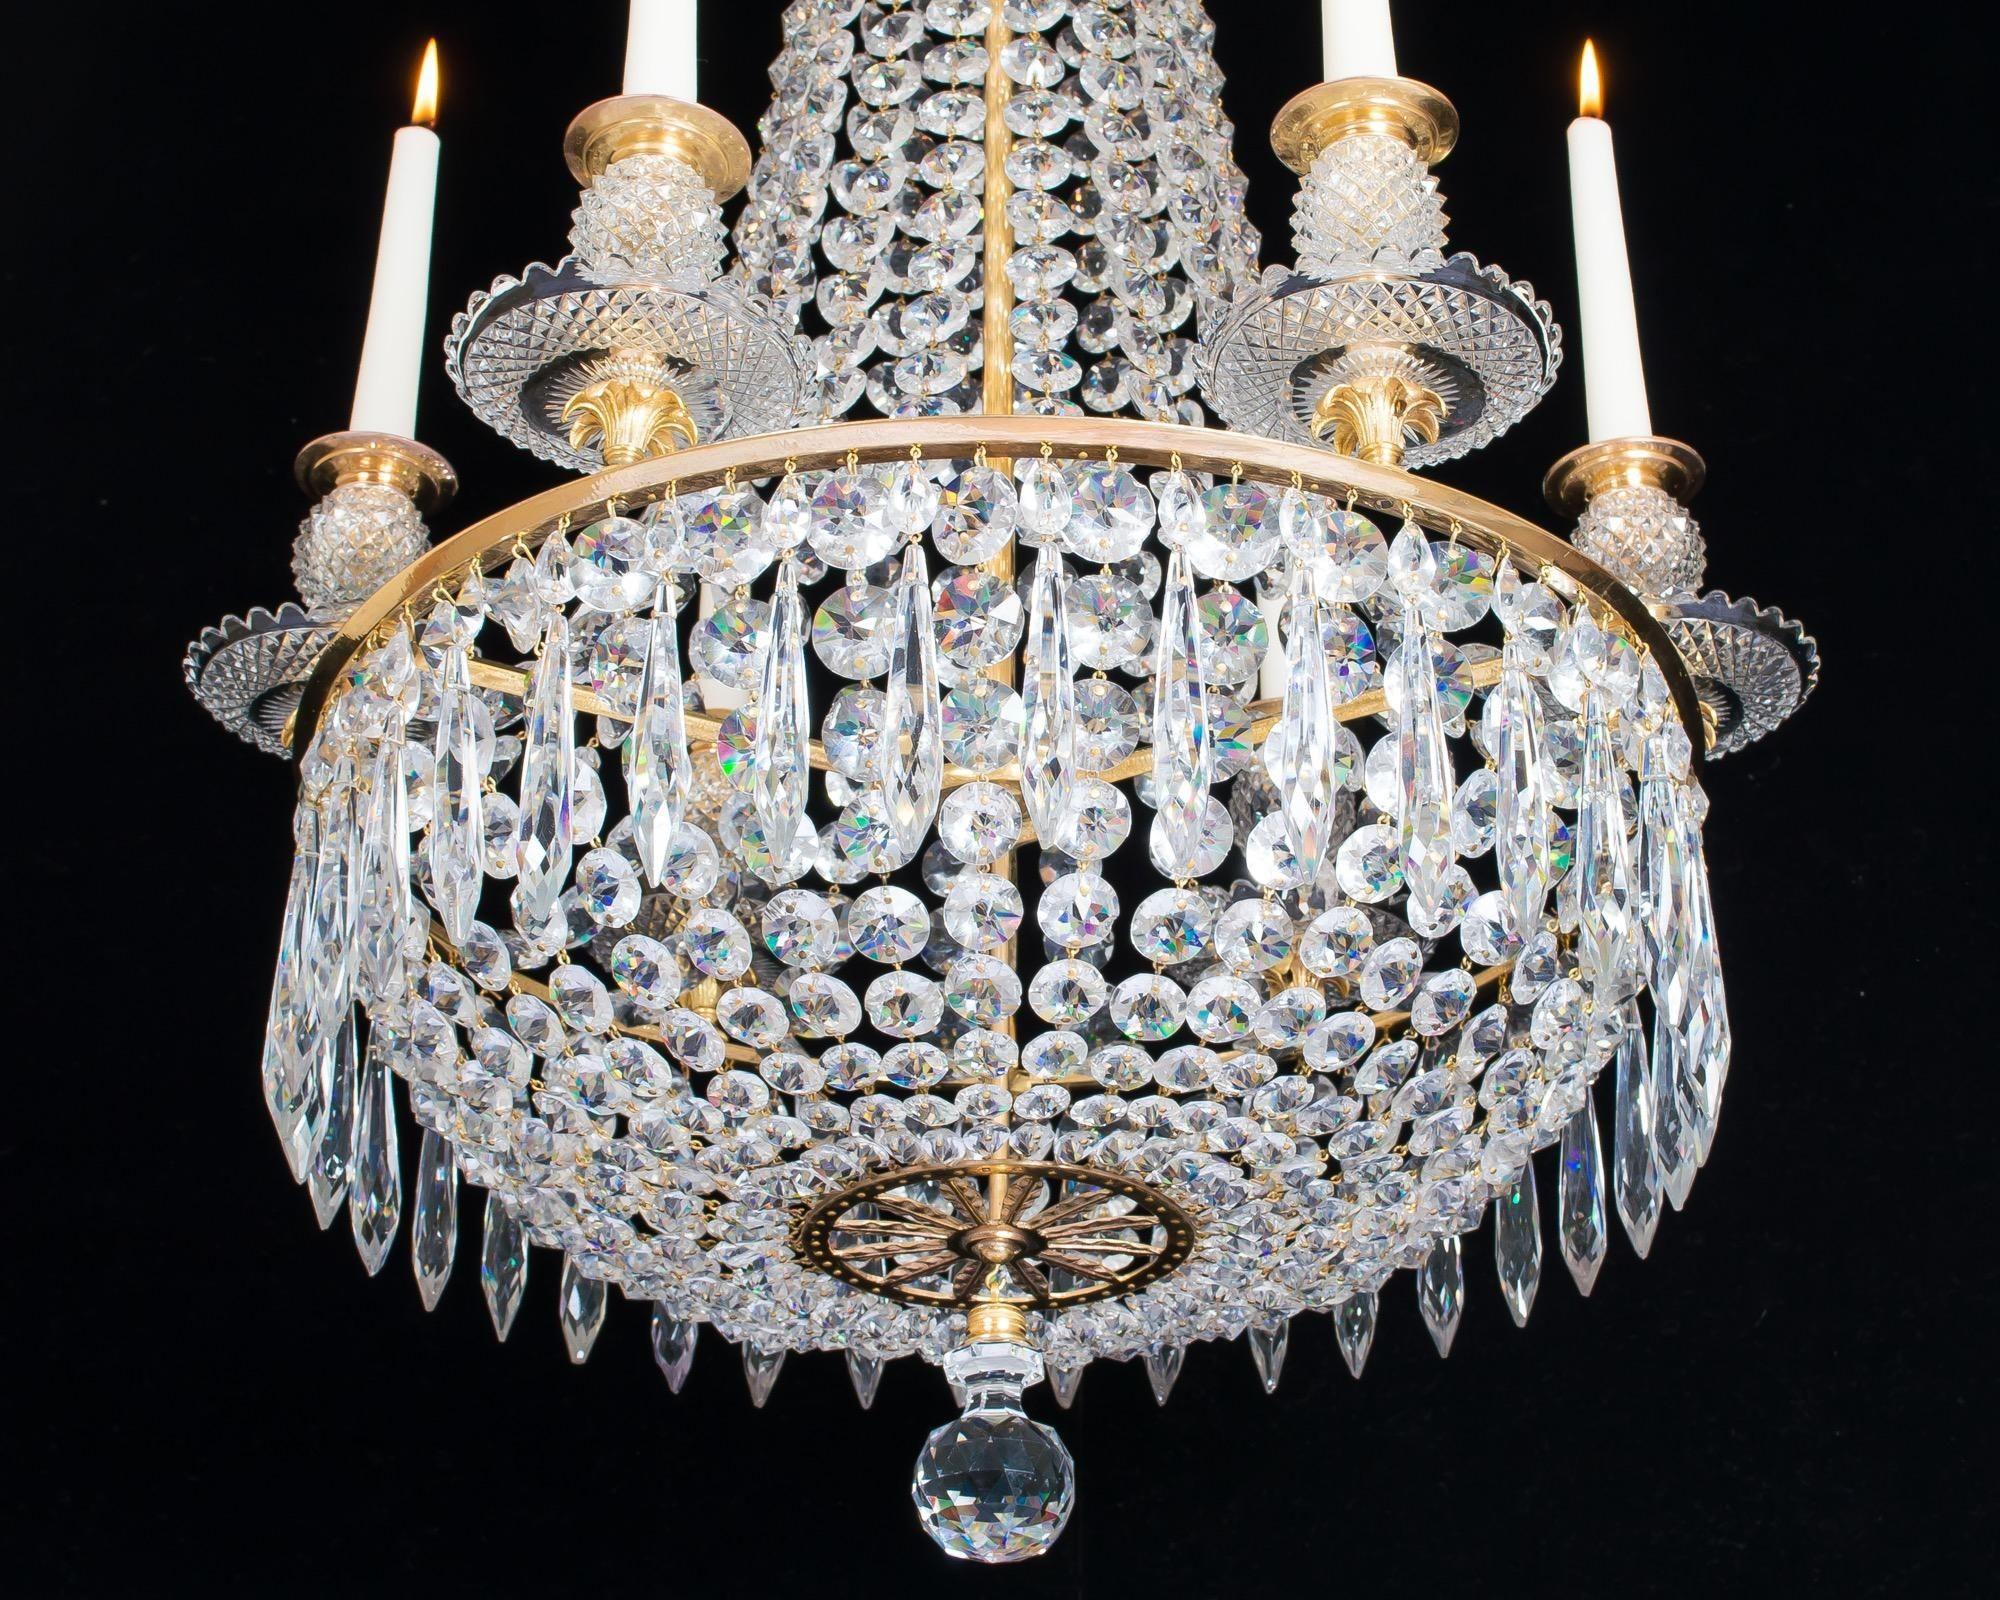 19th Century Small Pair of Classic Regency Chandeliers by John Blades 